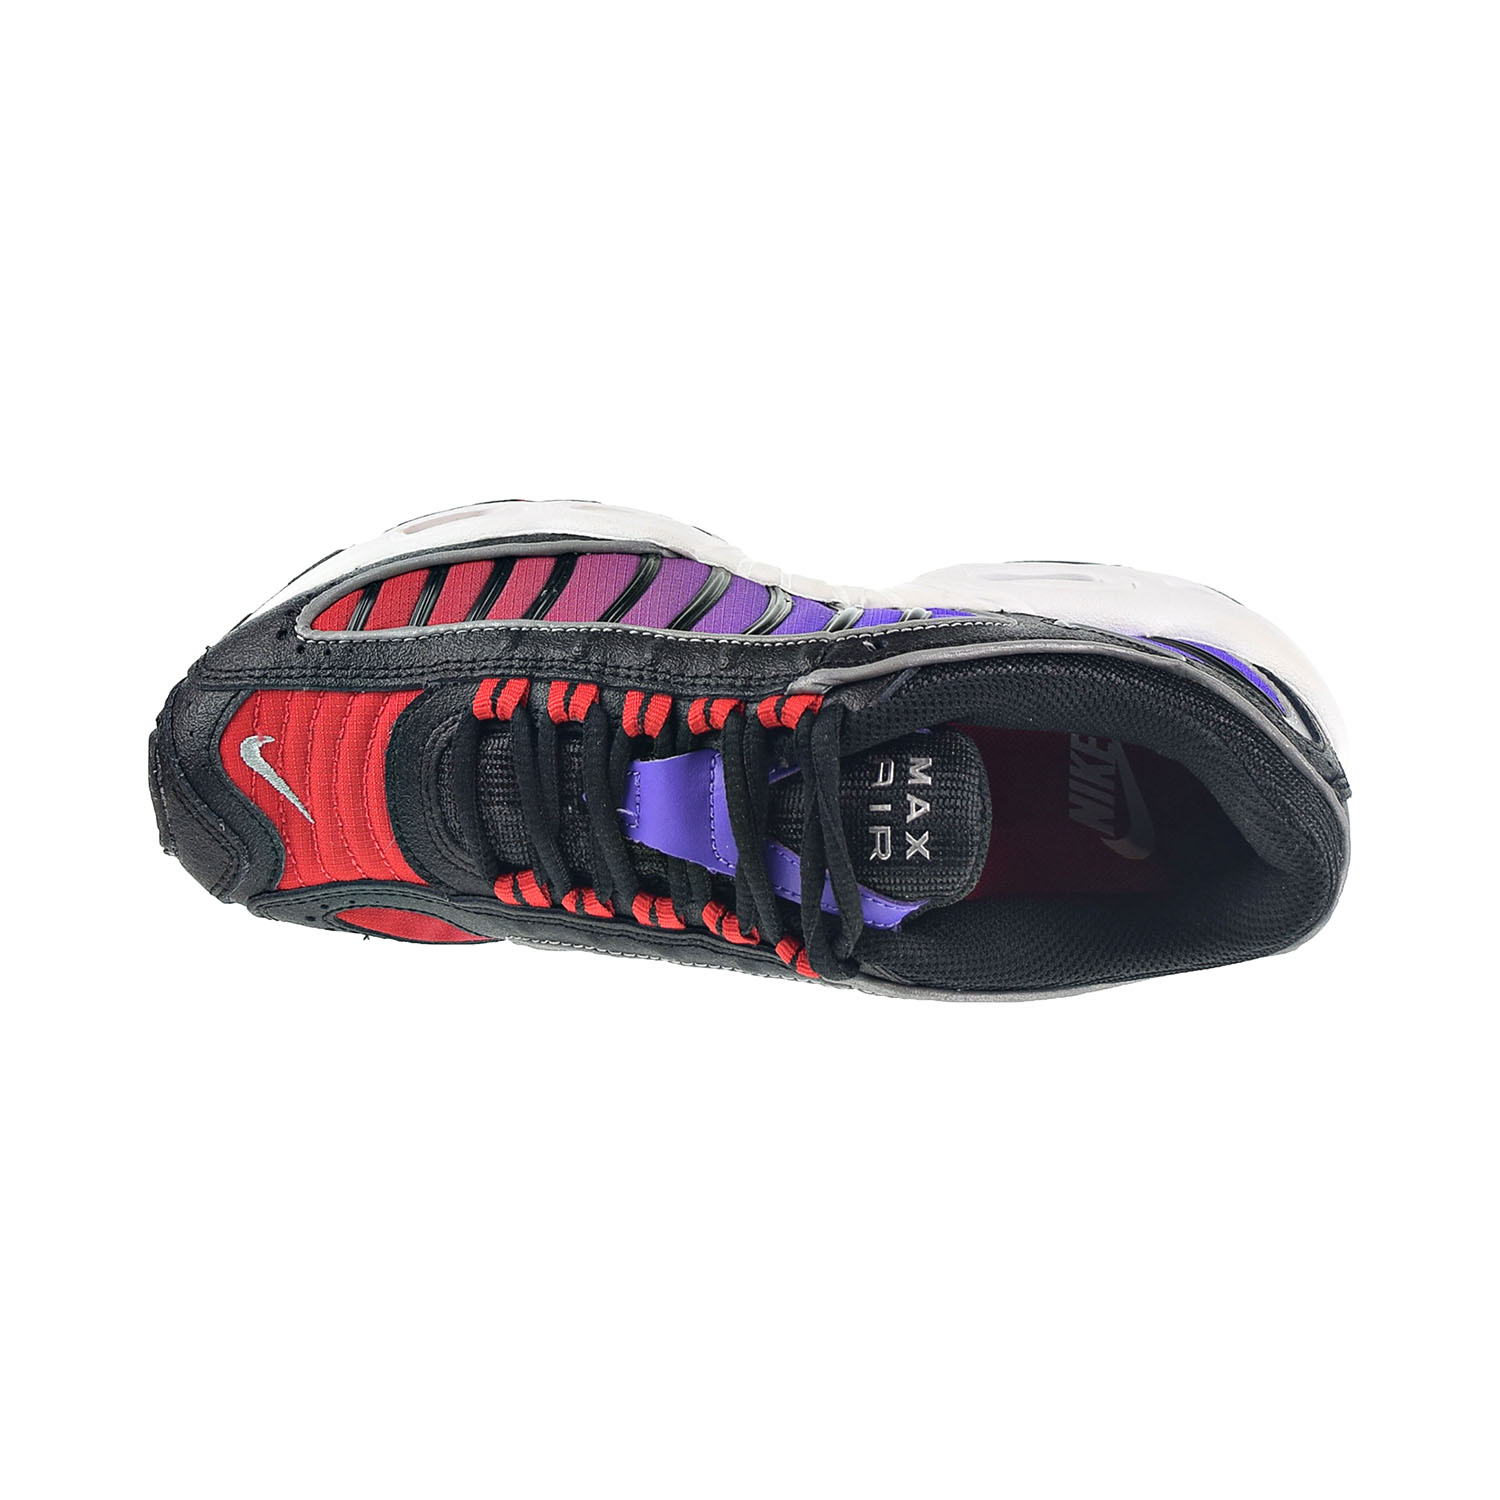 Nike Women's Air Max Tailwind IV Shoes Black-White-University Red-Psychic Purple cq9962-001 - image 5 of 6